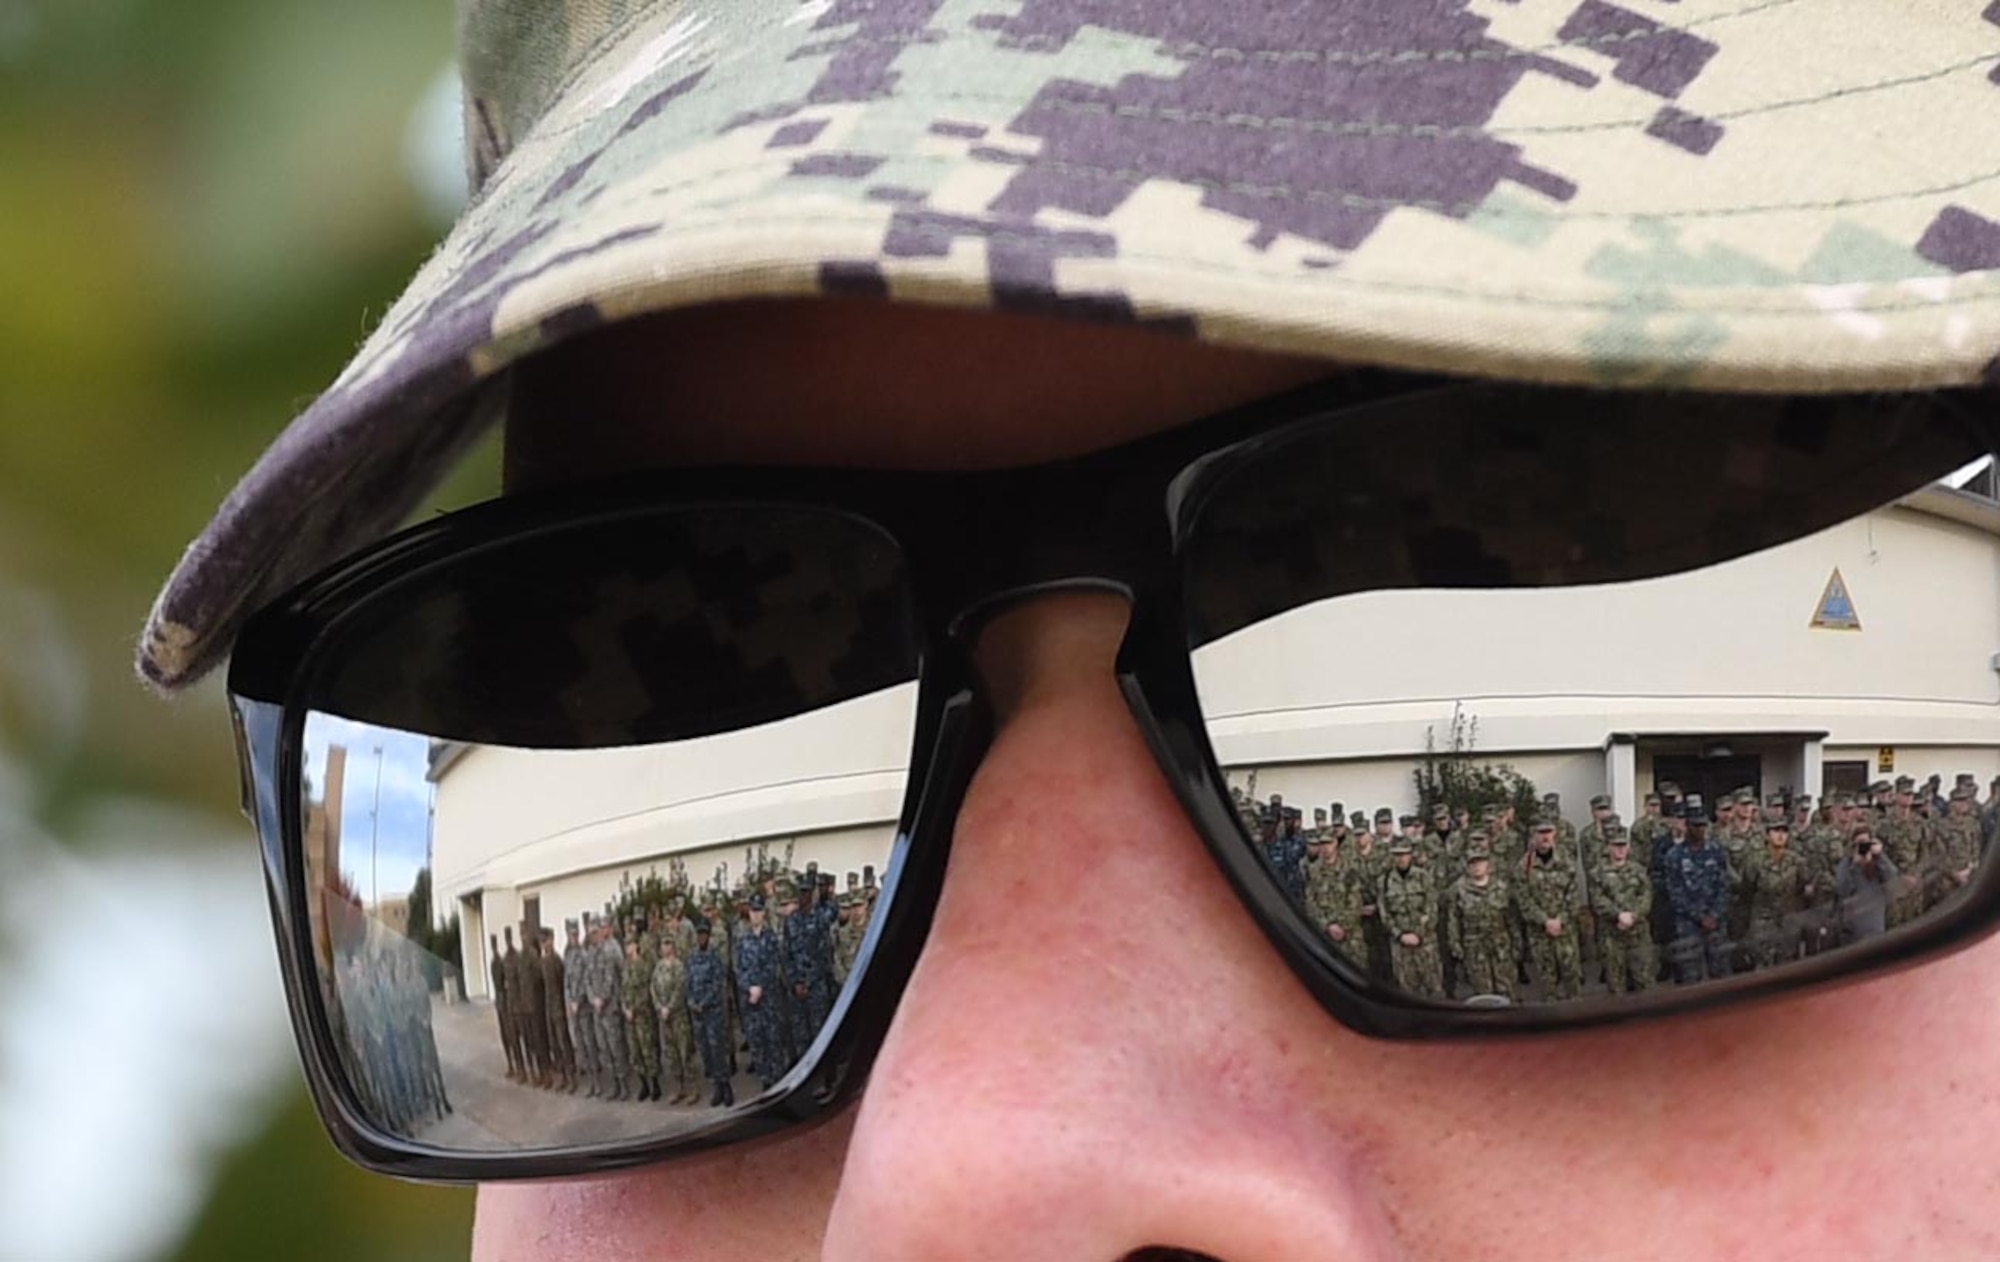 Keesler personnel attend the Center for Naval Aviation Technical Training Unit Keesler Pearl Harbor 77th Anniversary Remembrance Ceremony as seen through the sunglasses reflection of U.S. Navy Aviation Electronics Technician 1st Class Nathaniel Eakins, CNATTU Keesler instructor, at Keesler Air Force Base, Mississippi, Dec. 7, 2018. More than 100 Keesler personnel attended the event to honor those lost in the Dec. 7, 1941, Pearl Harbor attacks. (U.S. Air Force photo by Kemberly Groue)